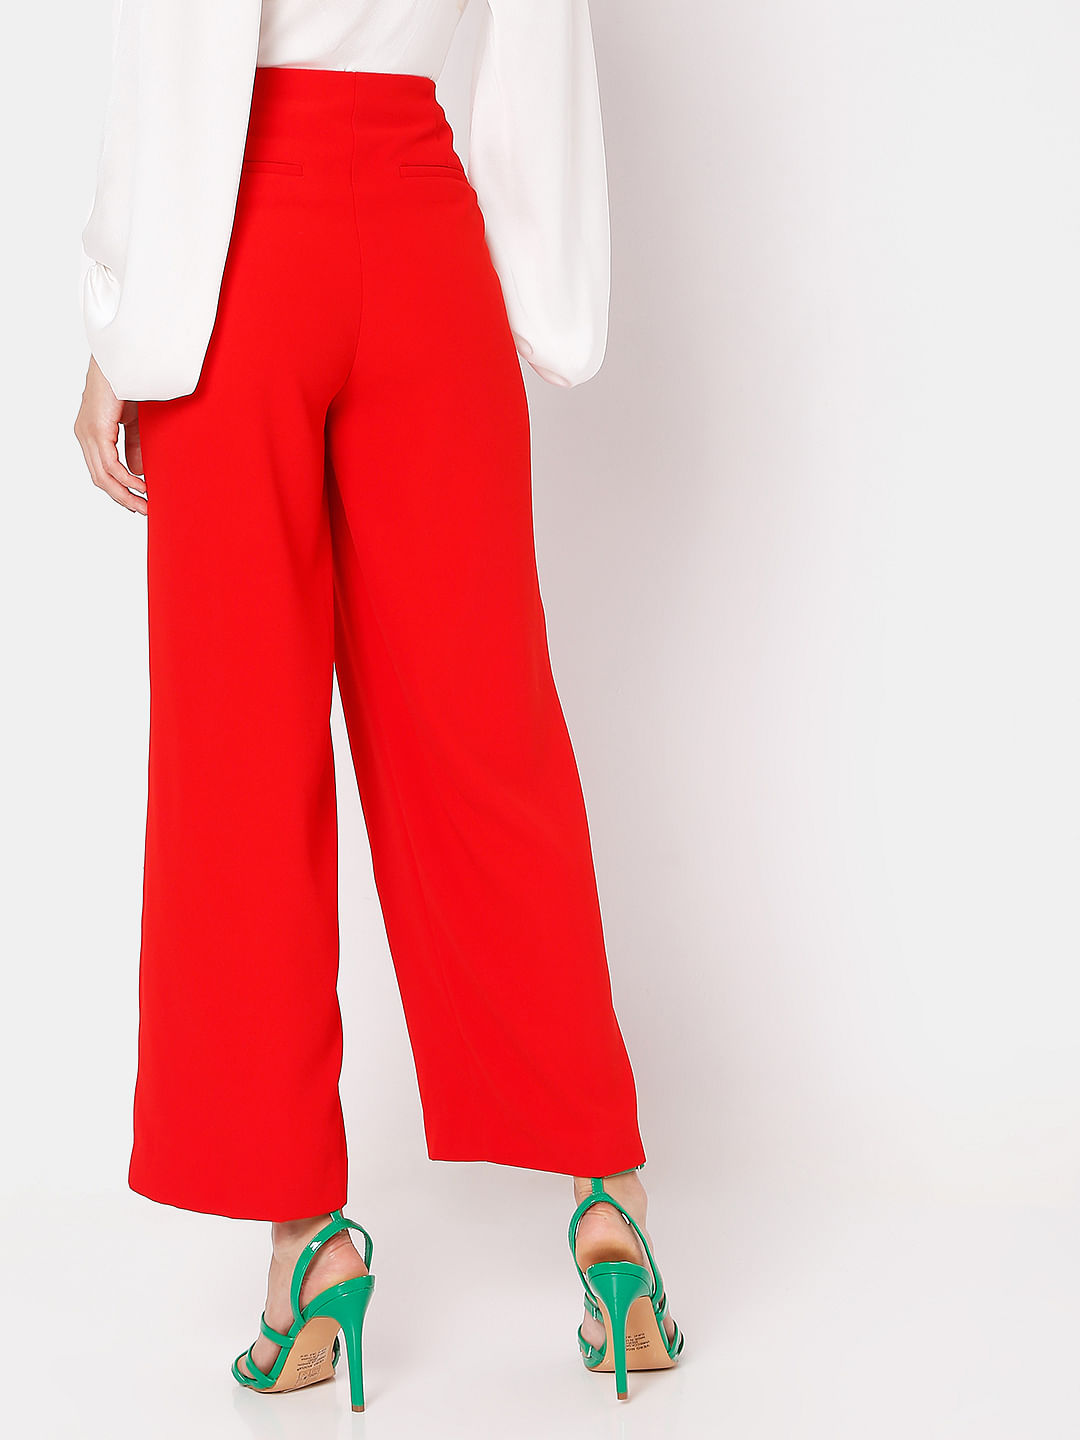 Clothink India Womens Regular Fit Trousers RED